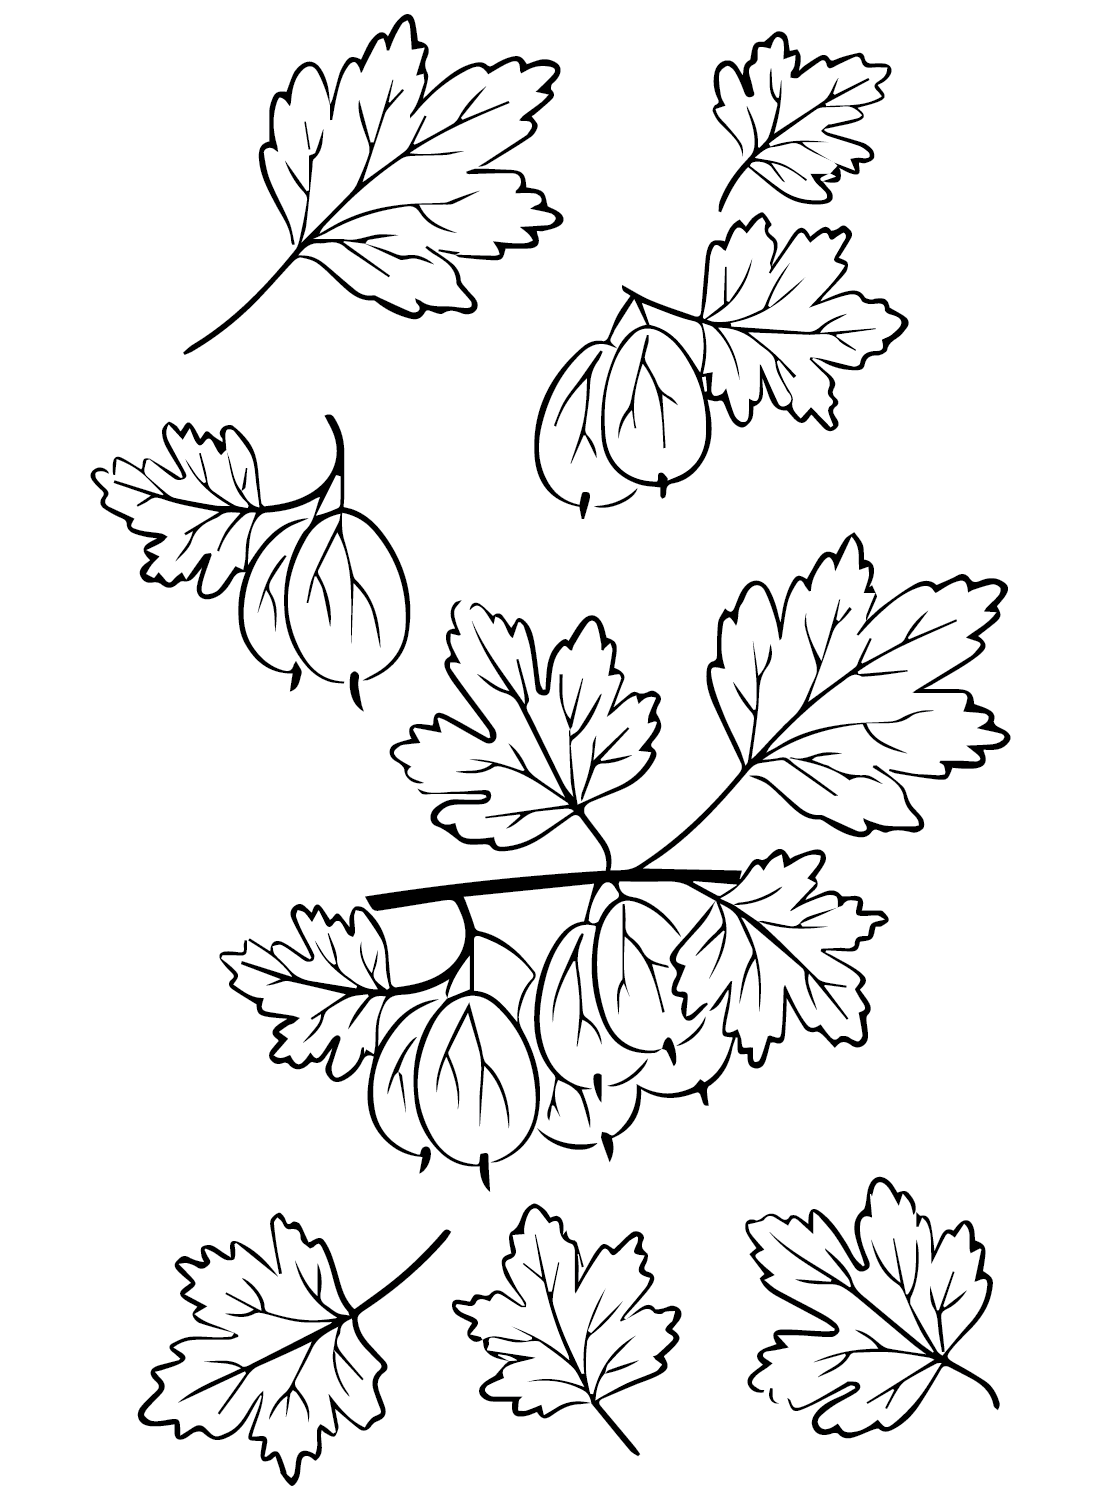 Gooseberry Free Coloring Page